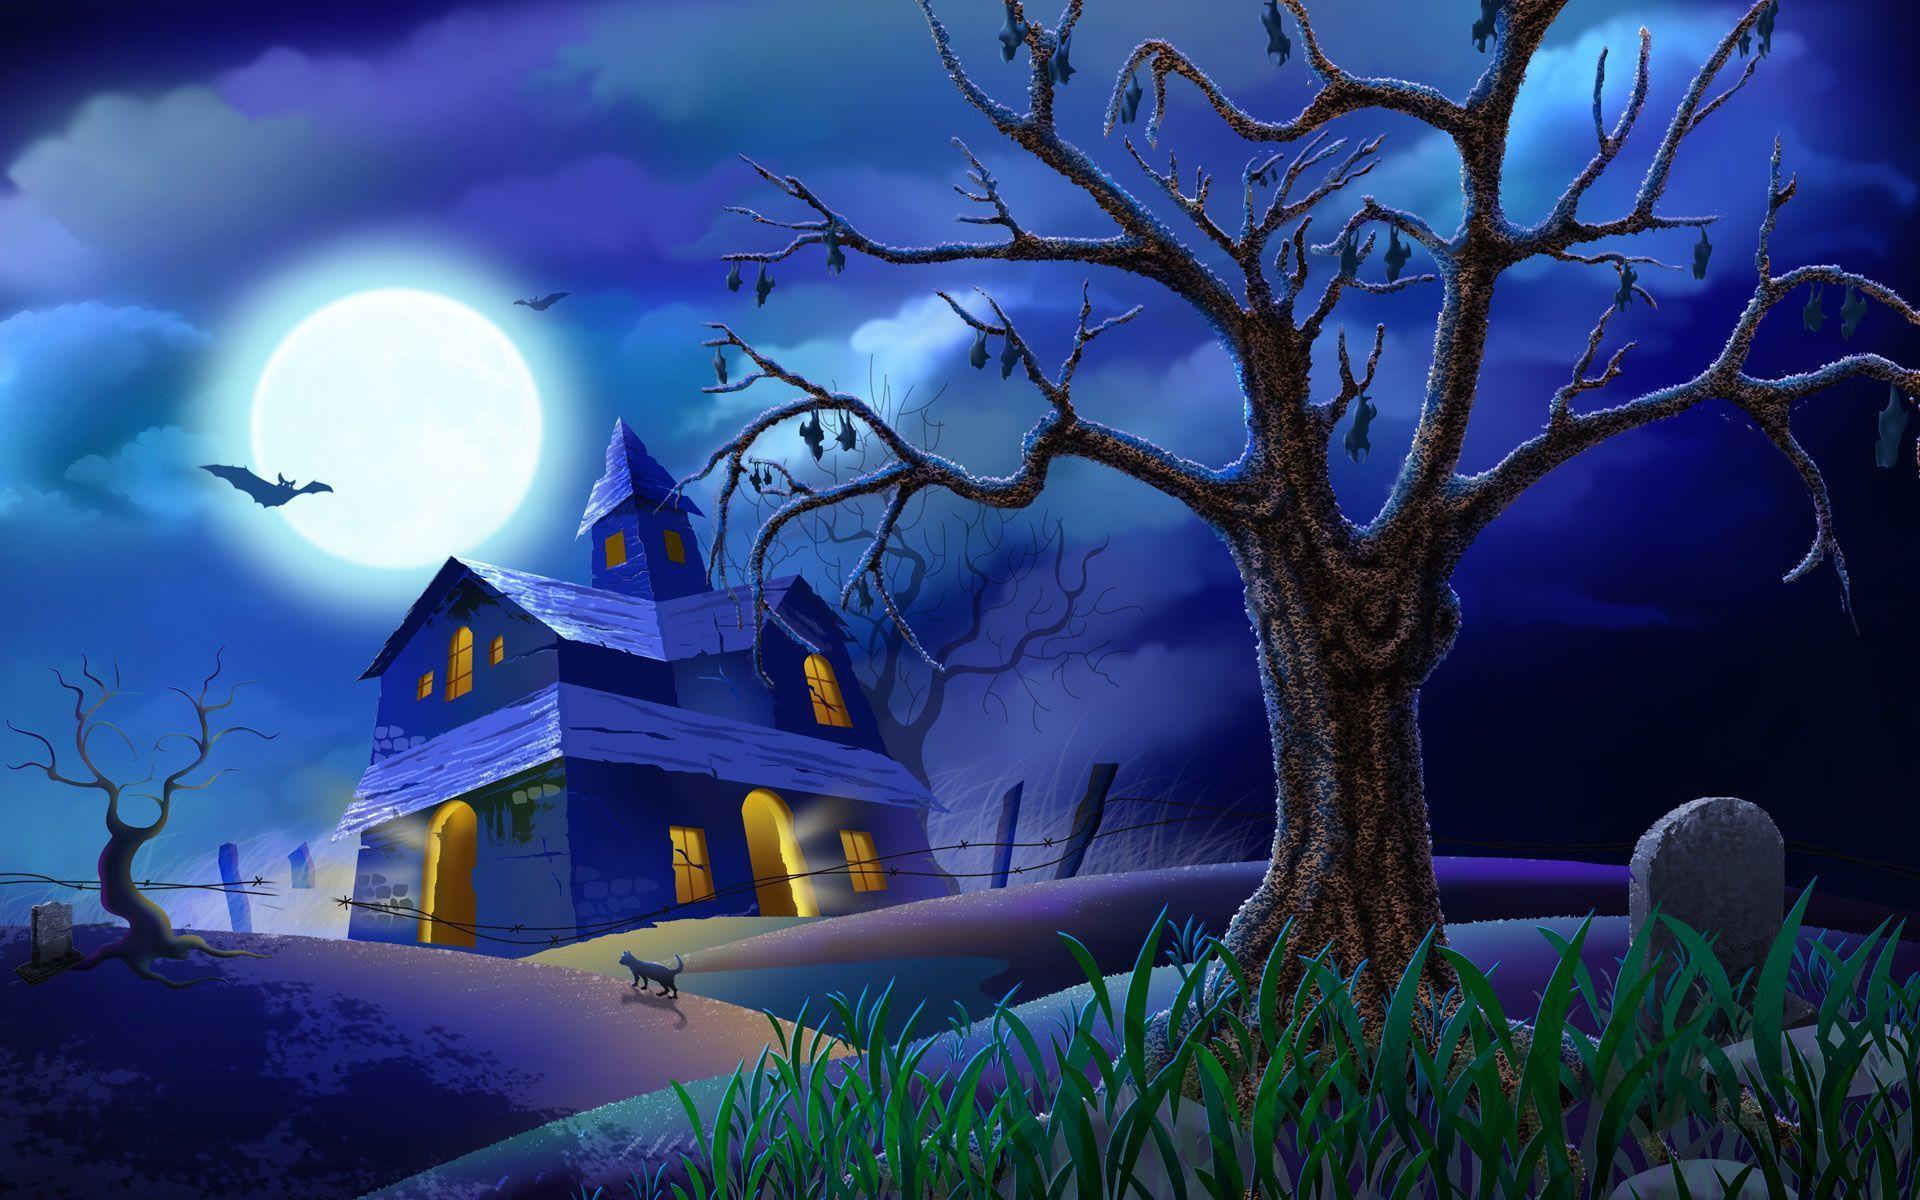 Scary Halloween 2012 HD Wallpaper. Pumpkins, Witches, Spider Web